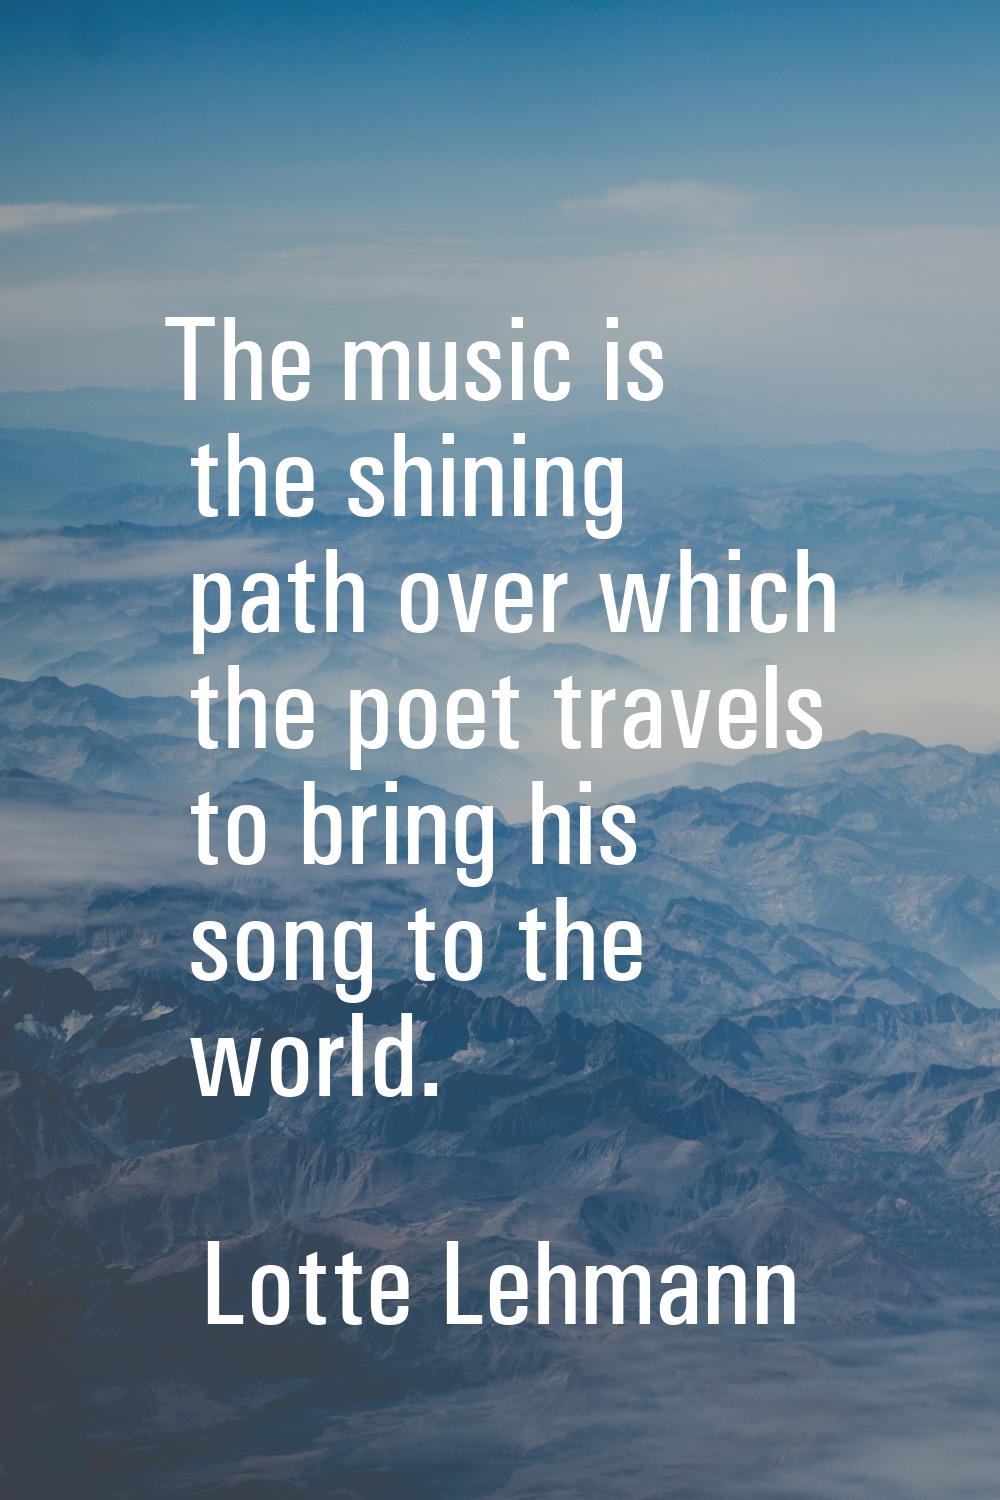 The music is the shining path over which the poet travels to bring his song to the world.